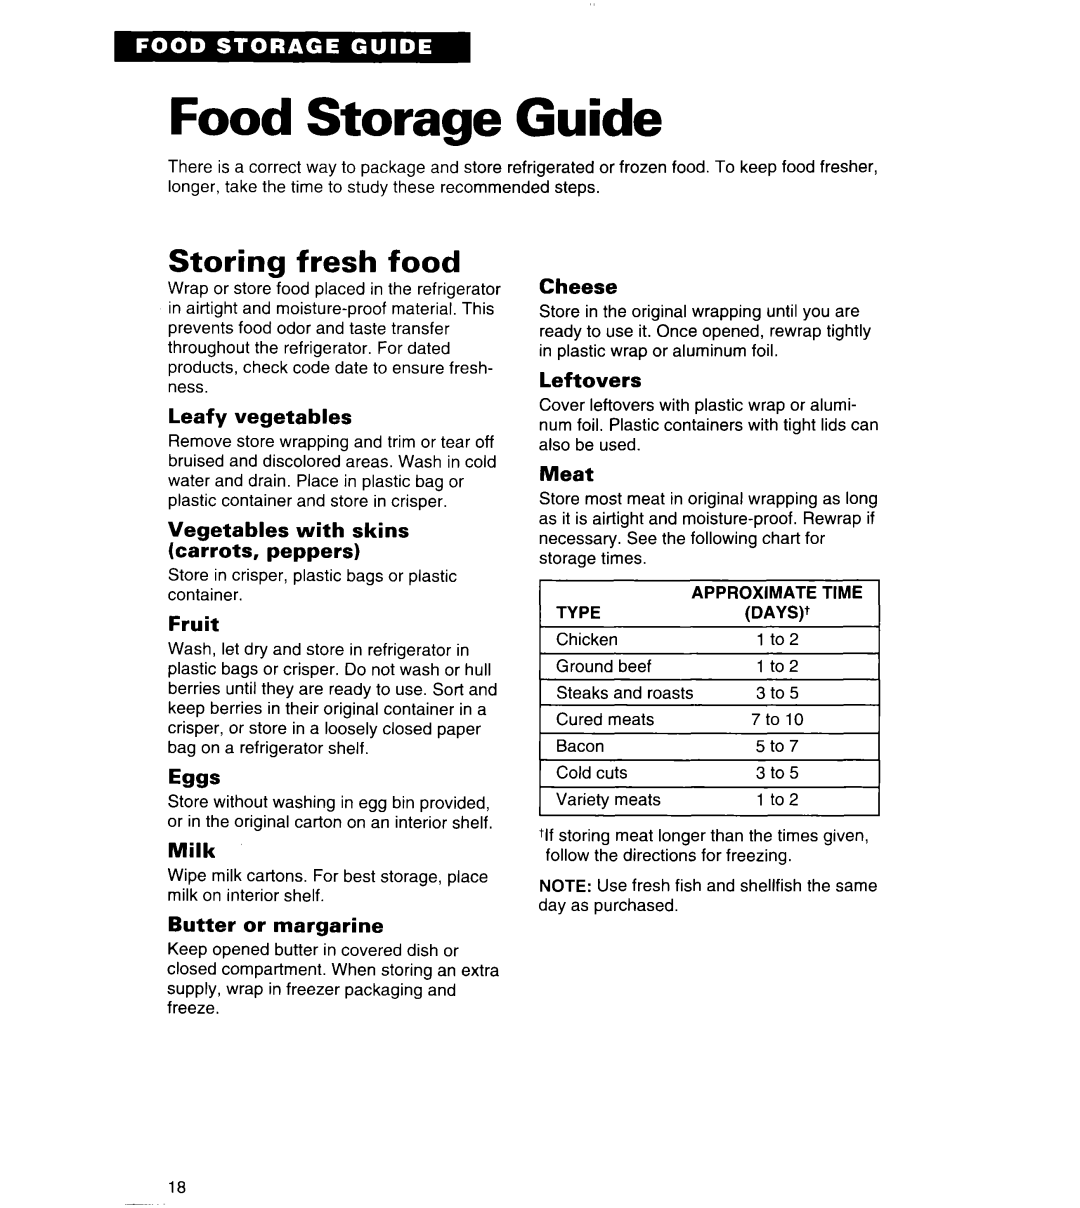 Whirlpool 6ED20PK Food Storage Guide, Storing fresh food, Leafy vegetables, Vegetables with skins carrots, peppers, Fruit 